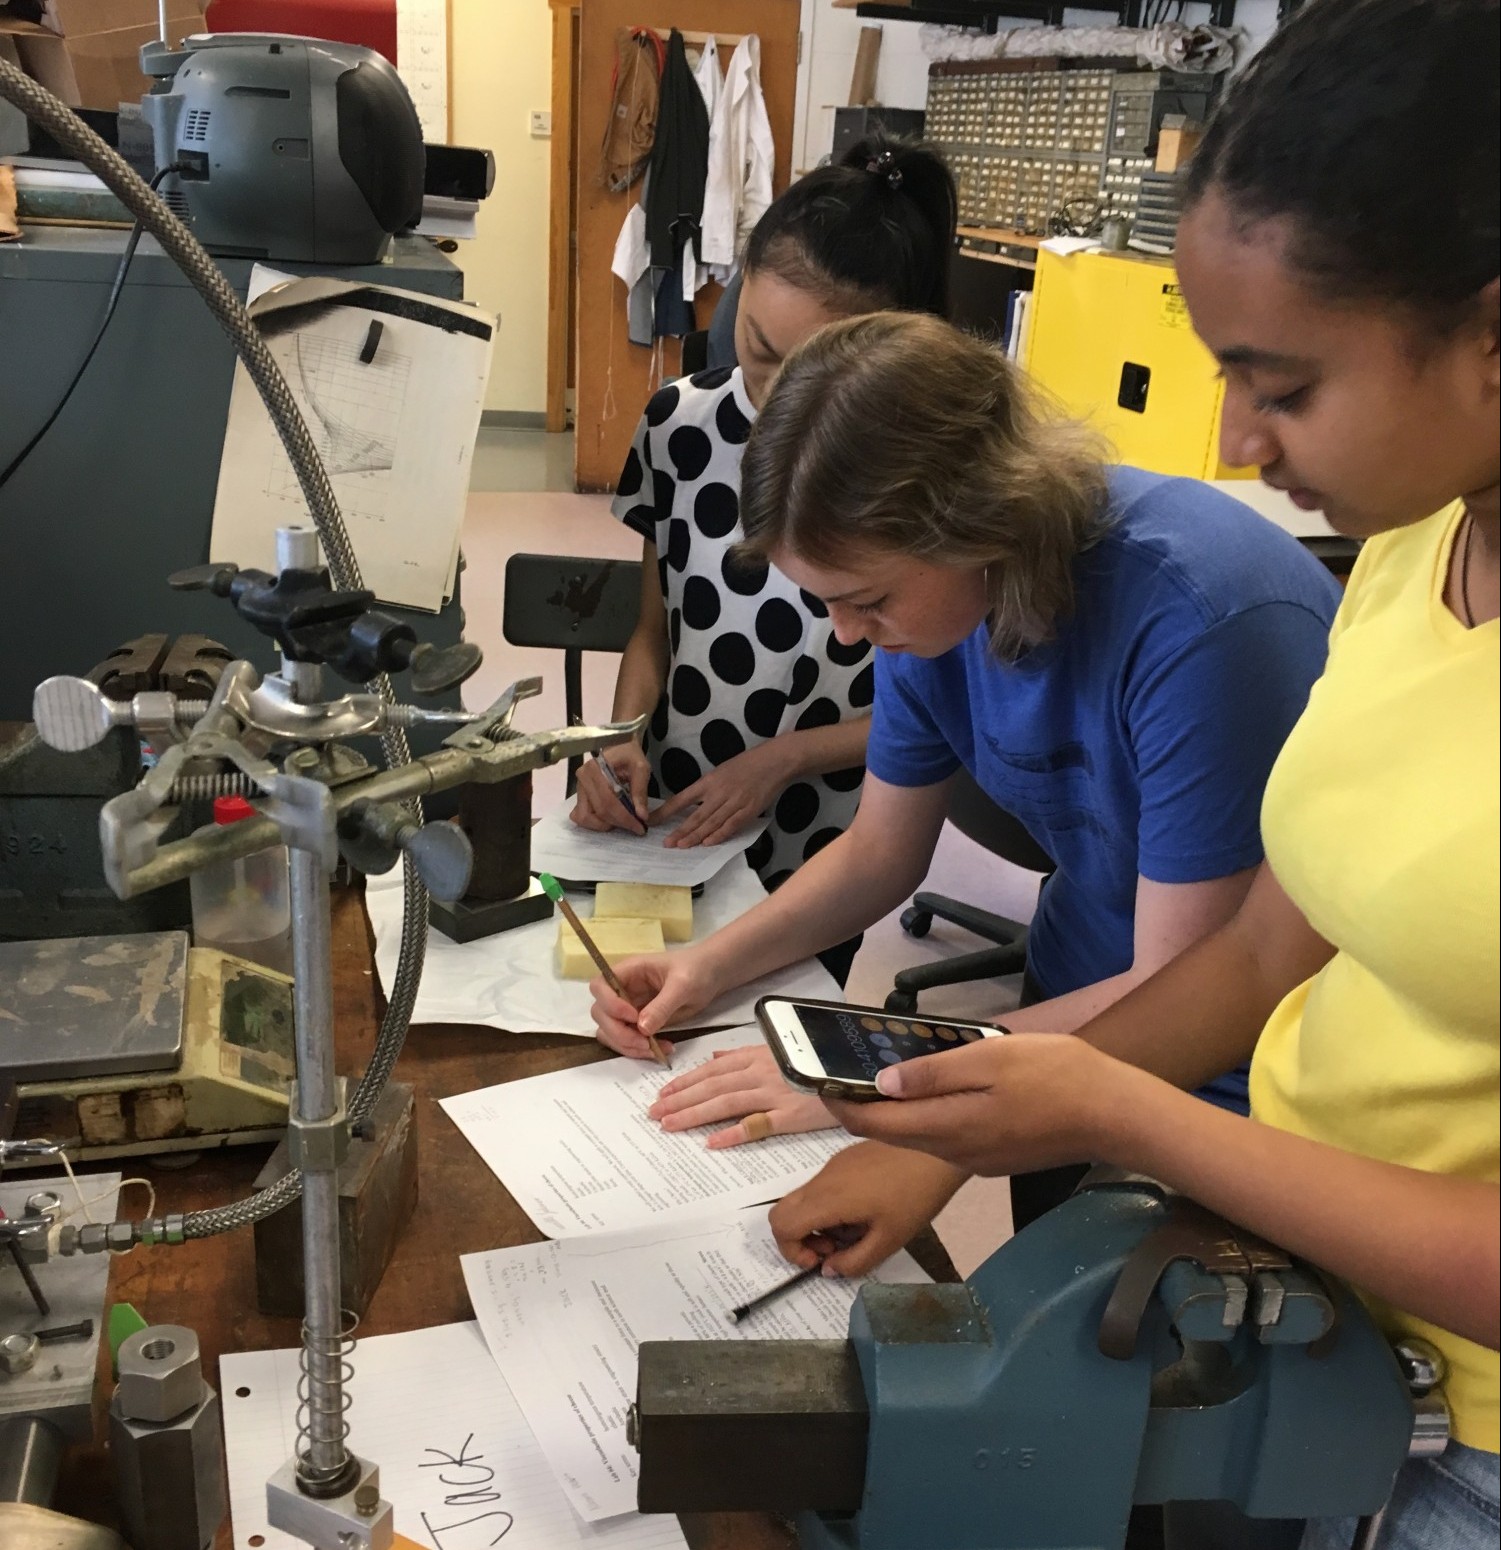 Summer interns "Team Jack" learn about ice and rock rheology by performing creep experiments on cheese (2019).